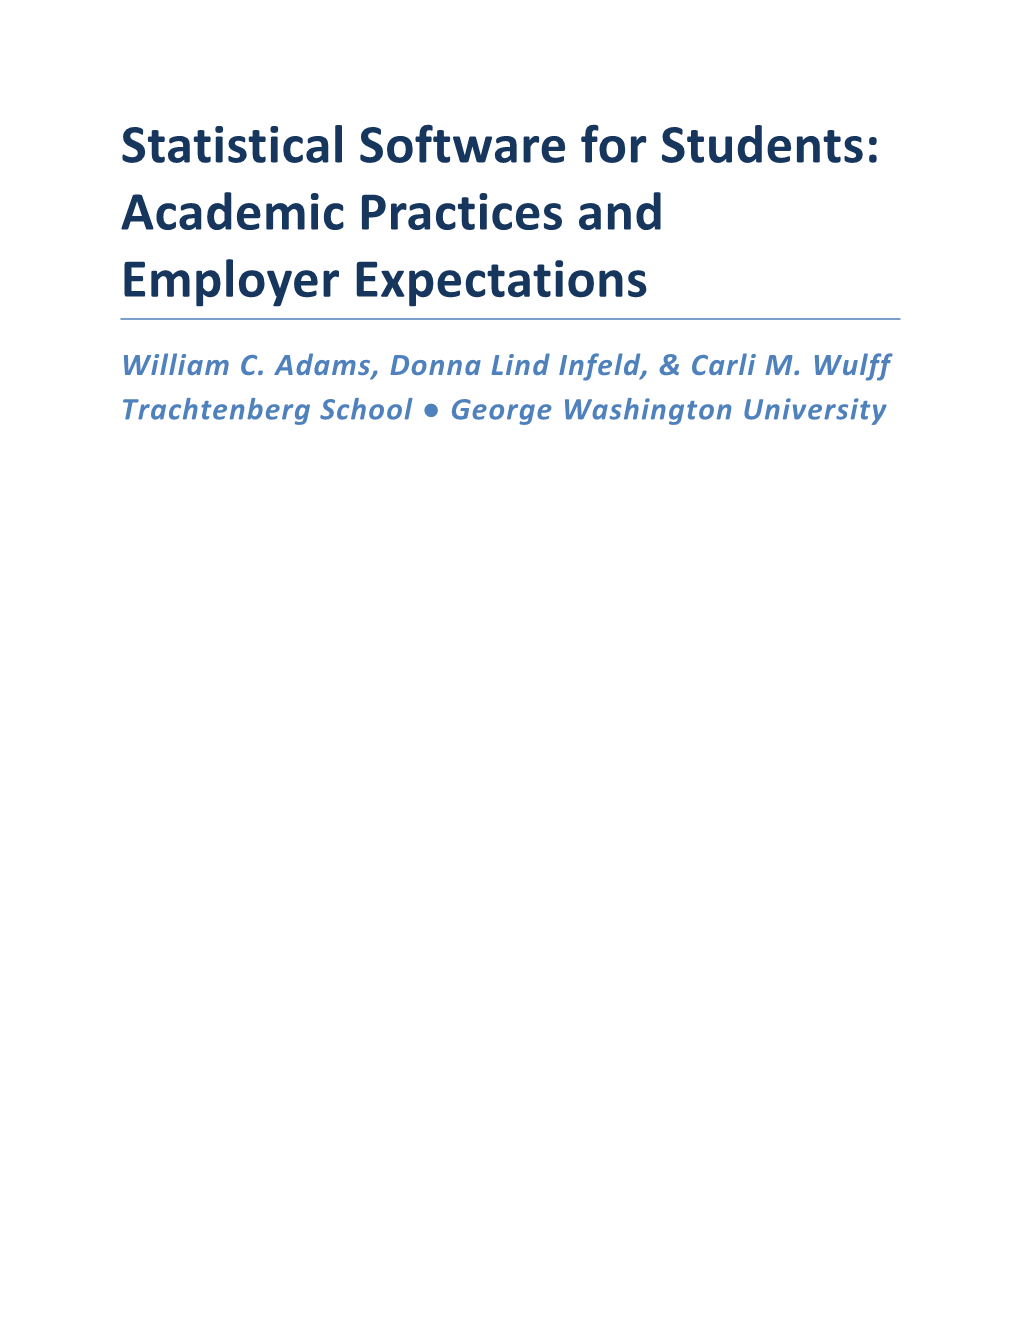 Statistical Software for Students: Academic Practices and Employer Expectations